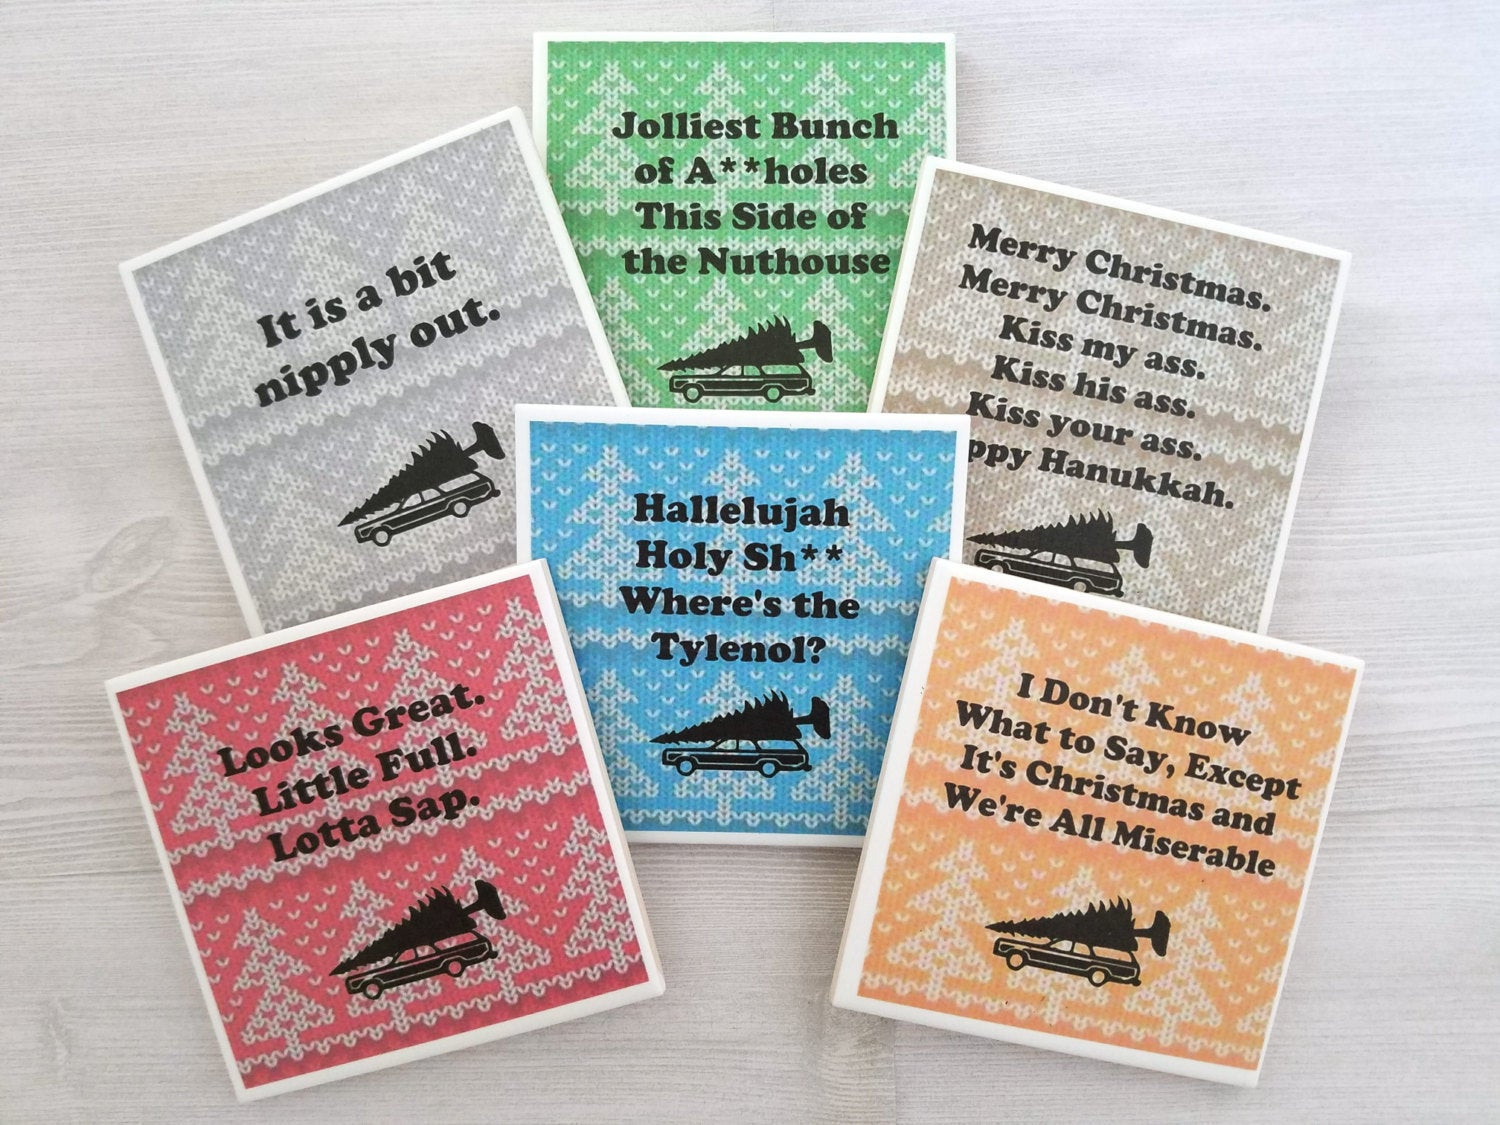 National.Lampoons Christmas Vacation Quotes
 Christmas Vacation Quotes National Lampoons Christmas Vacation